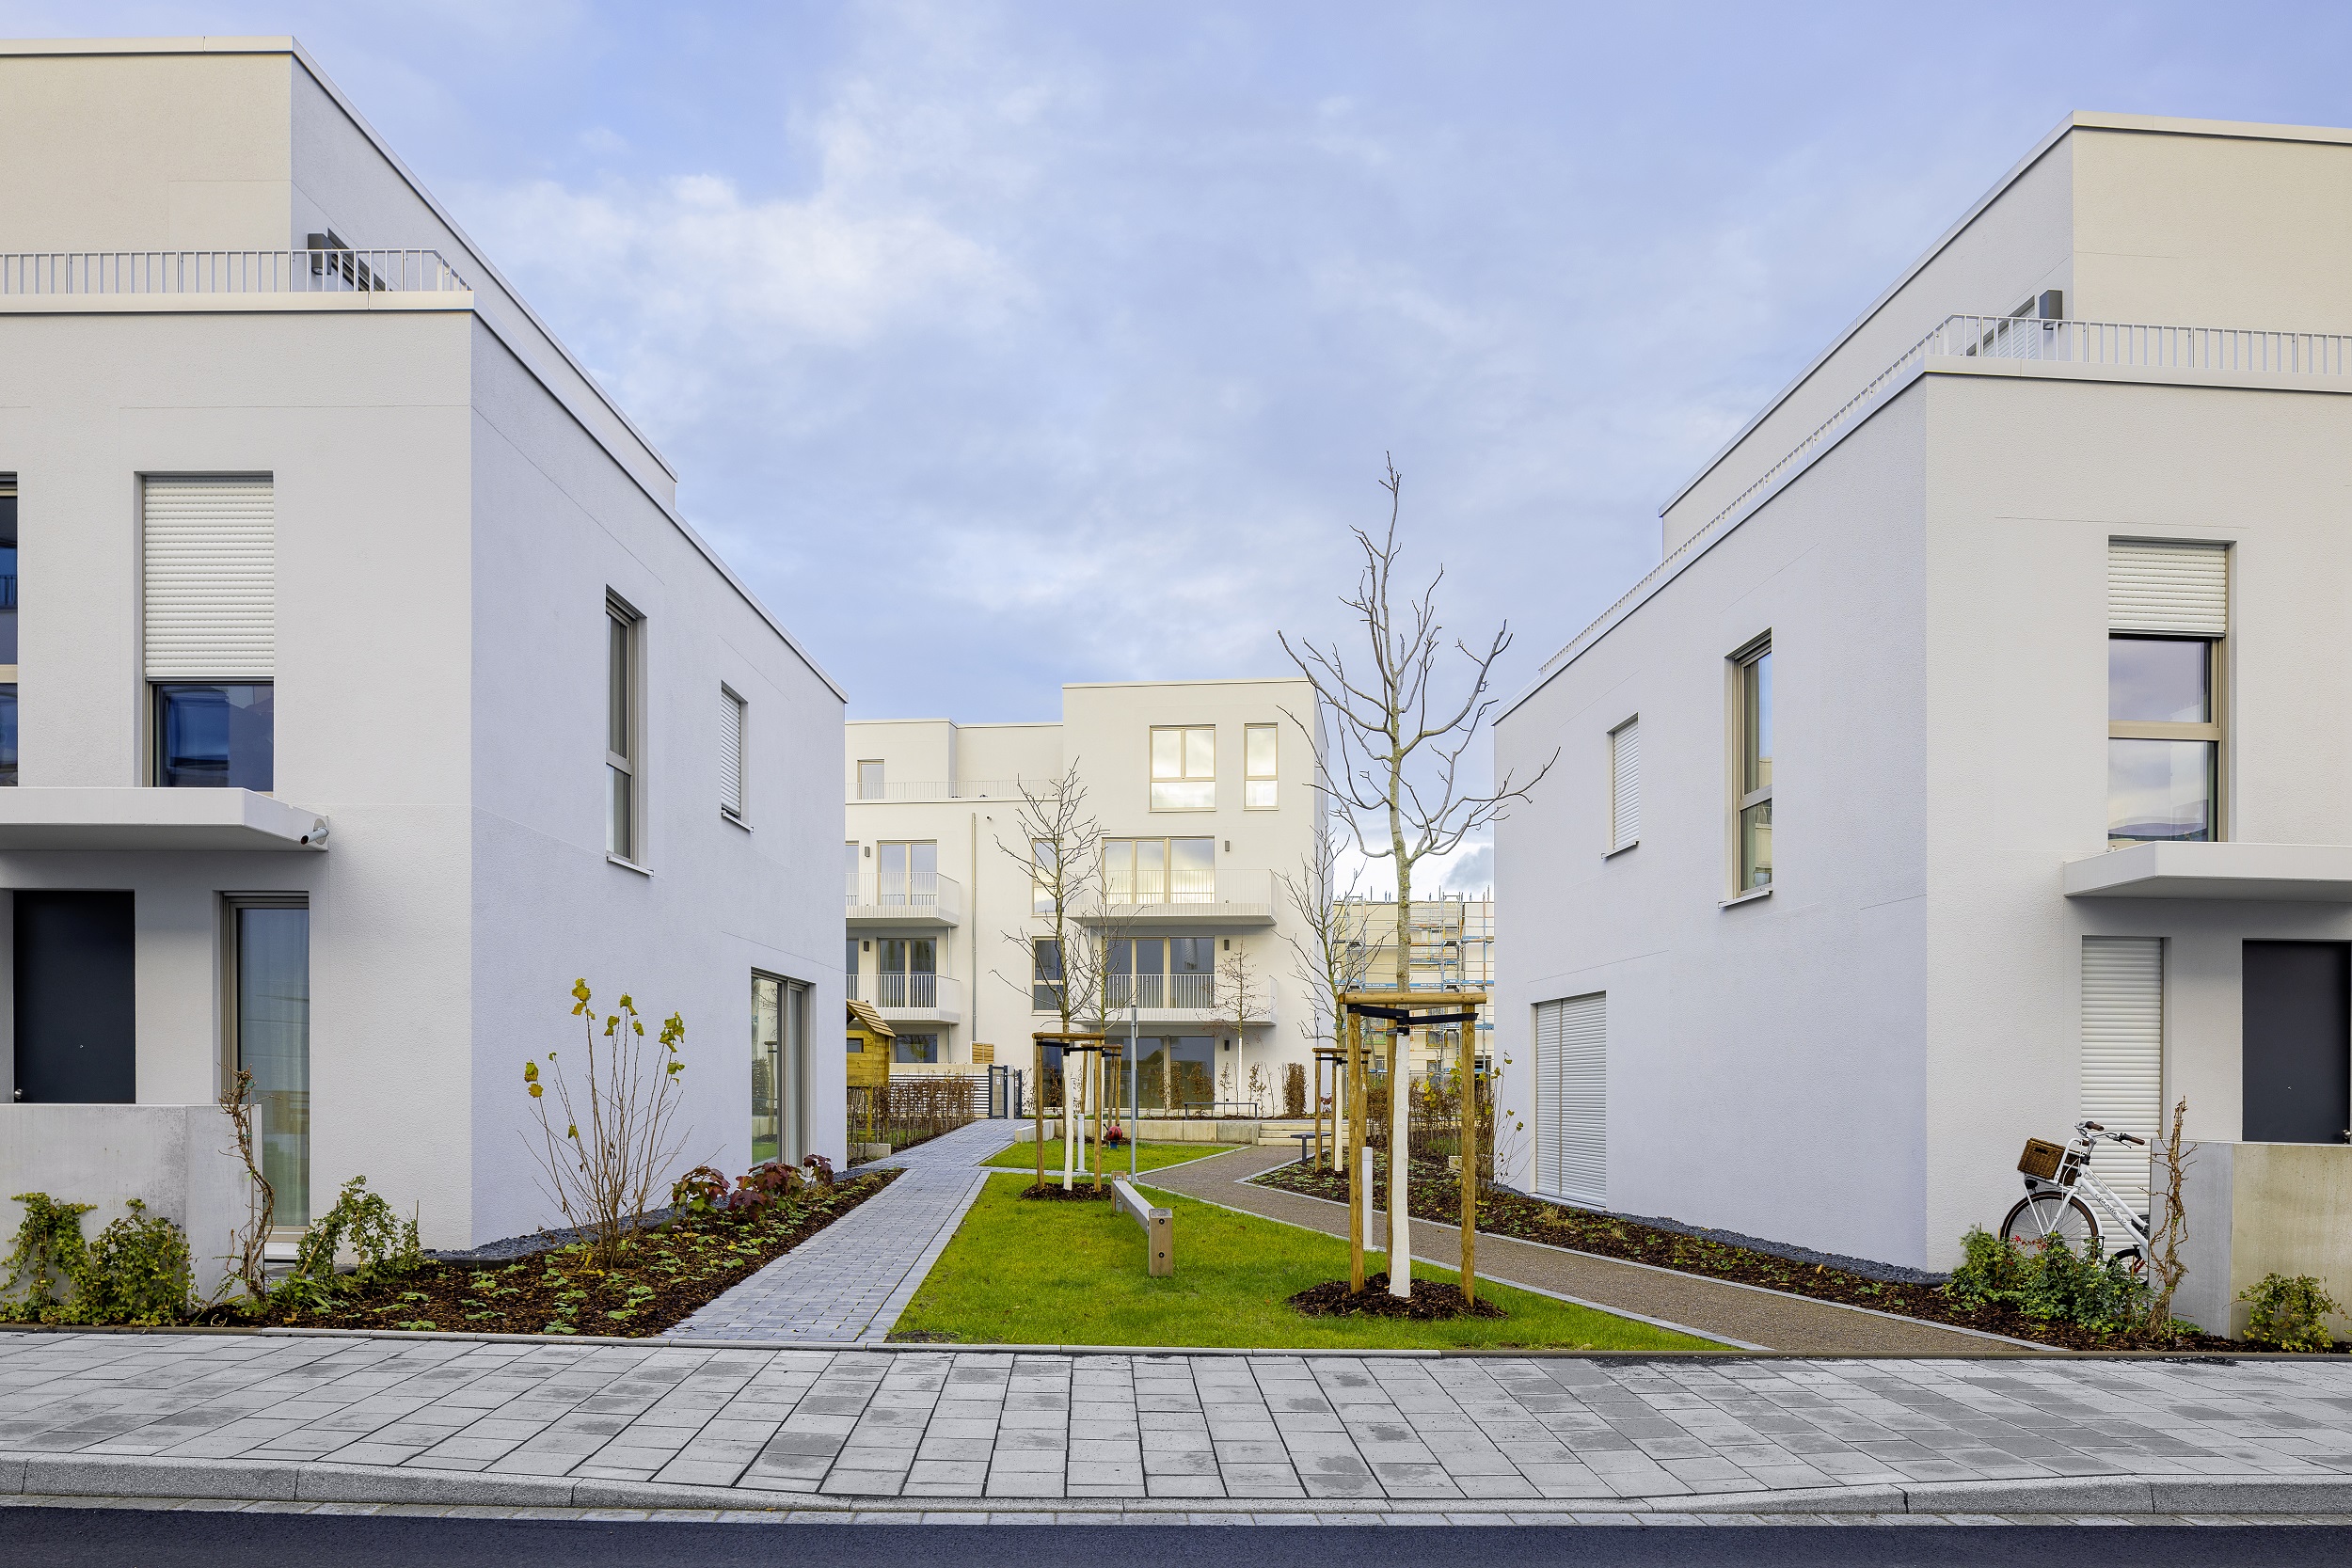 Project "Scholle 1" with 61 residential units in the "Wohnen im Hochfeld" neighbourhood in Düsseldorf completed